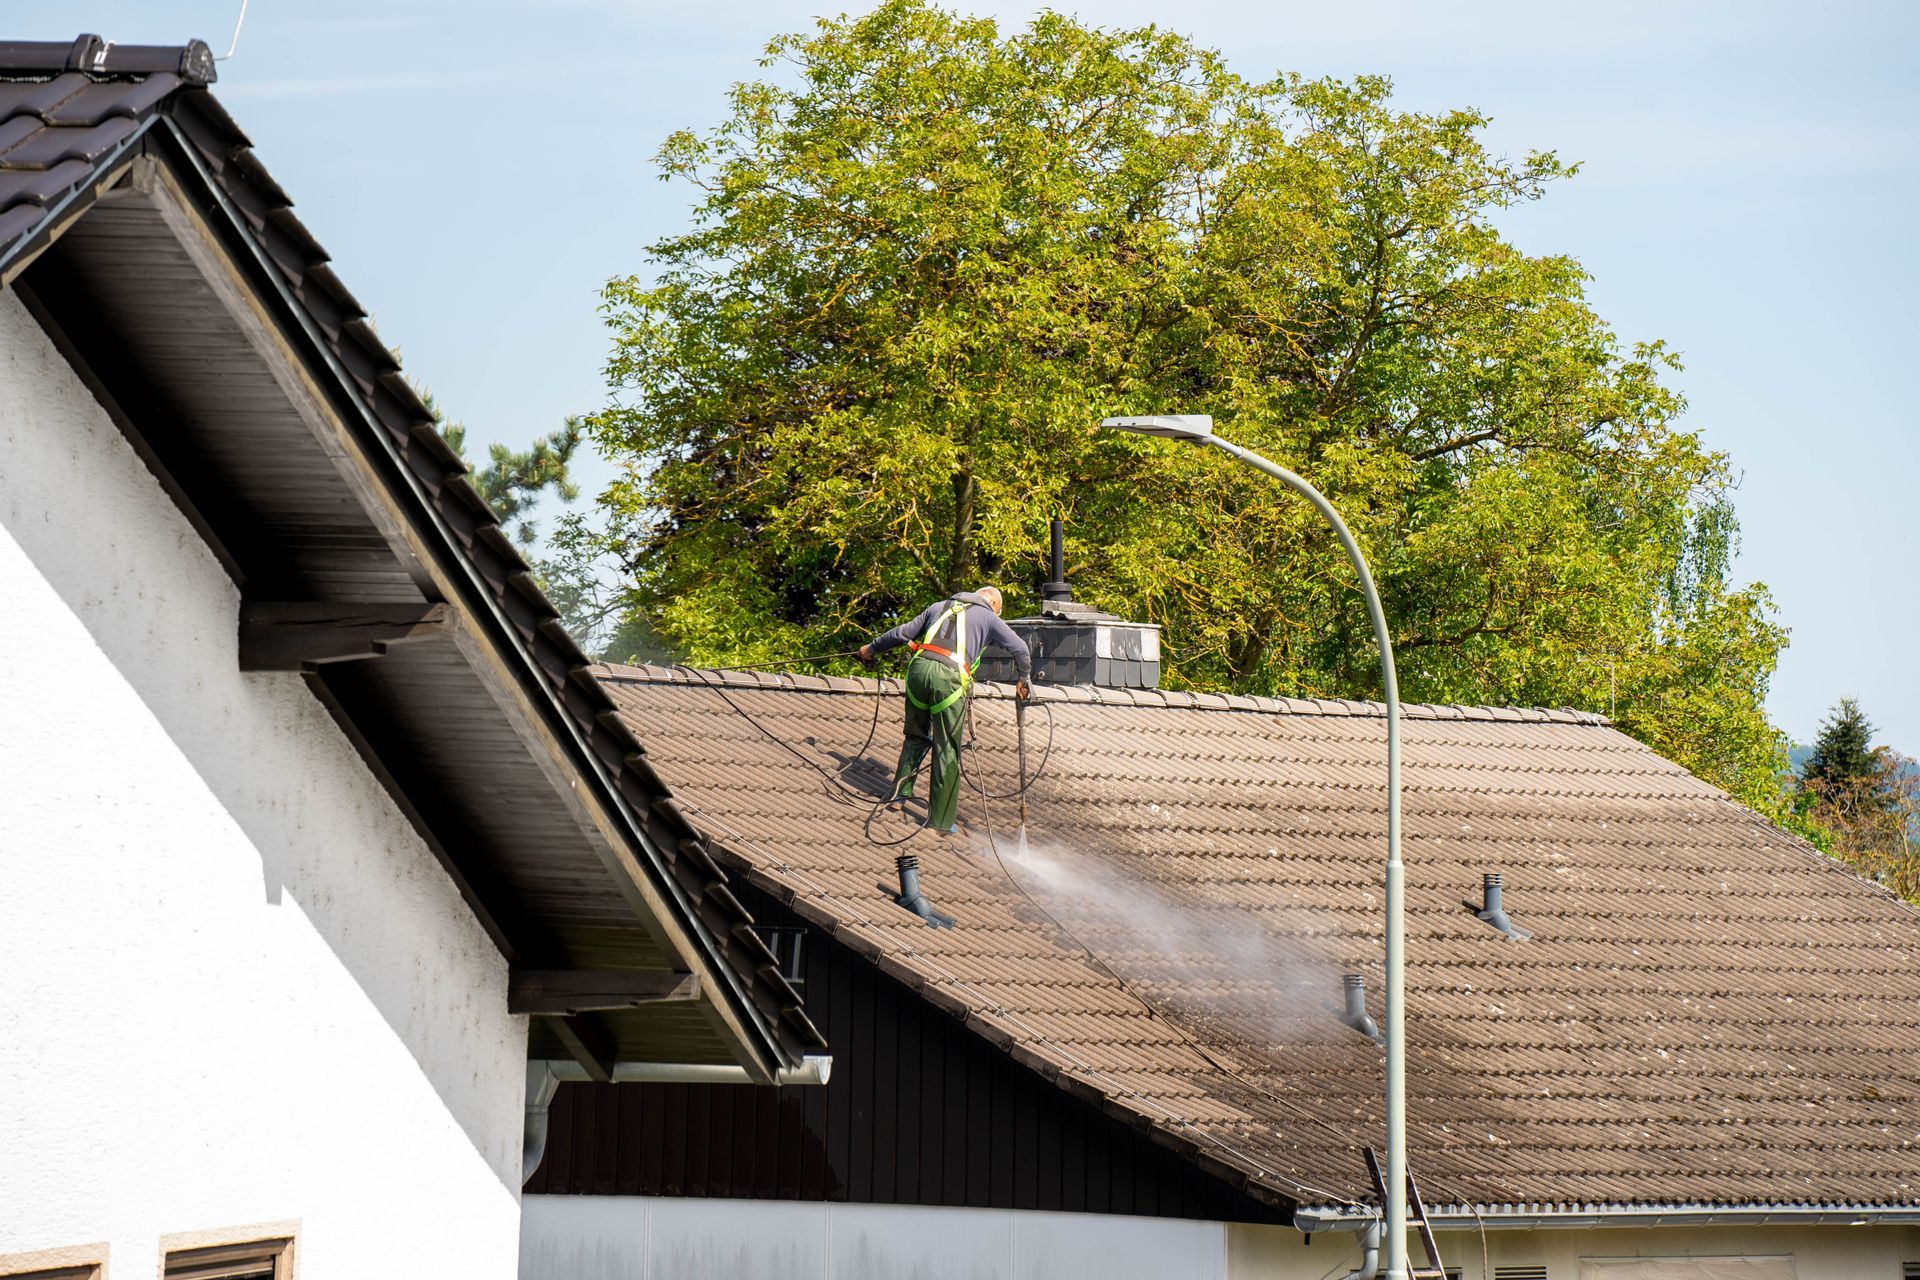 a man is cleaning the roof of a house with a high pressure washer